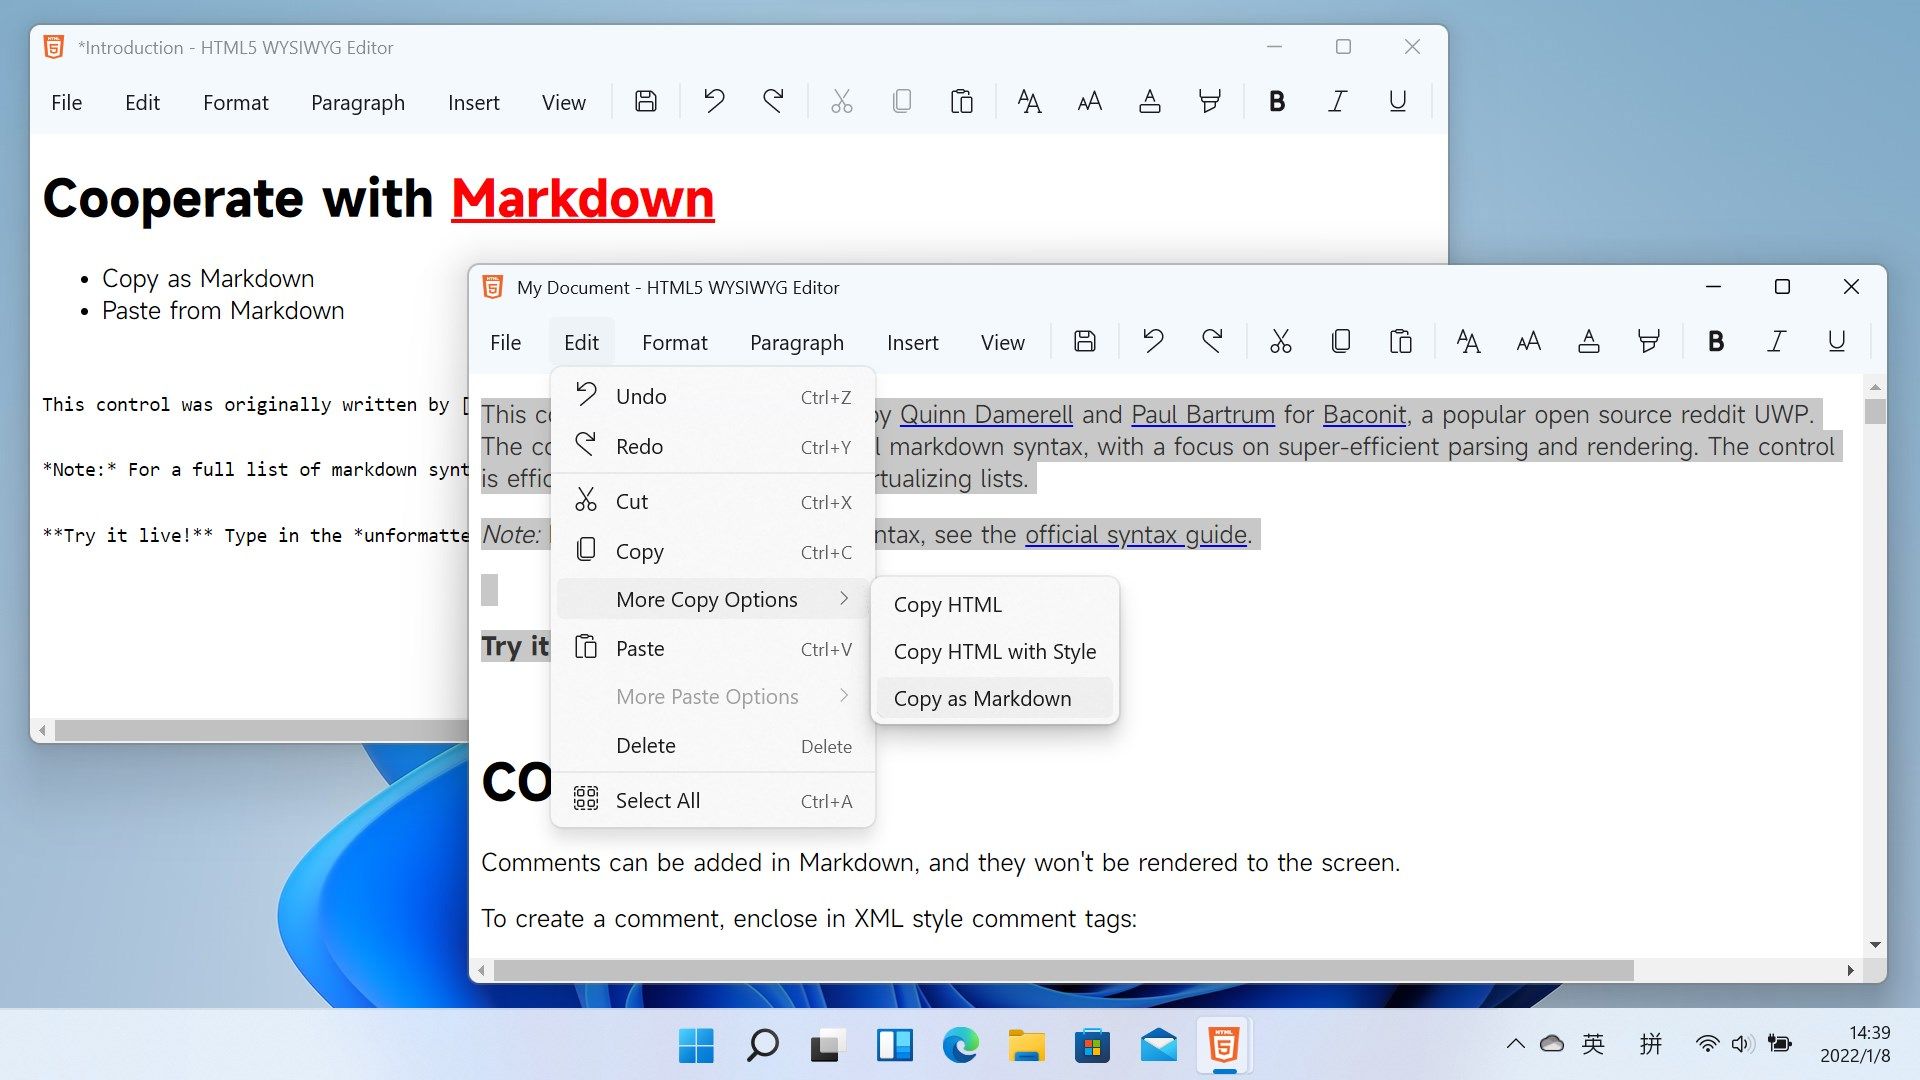 Cooperate with Markdown